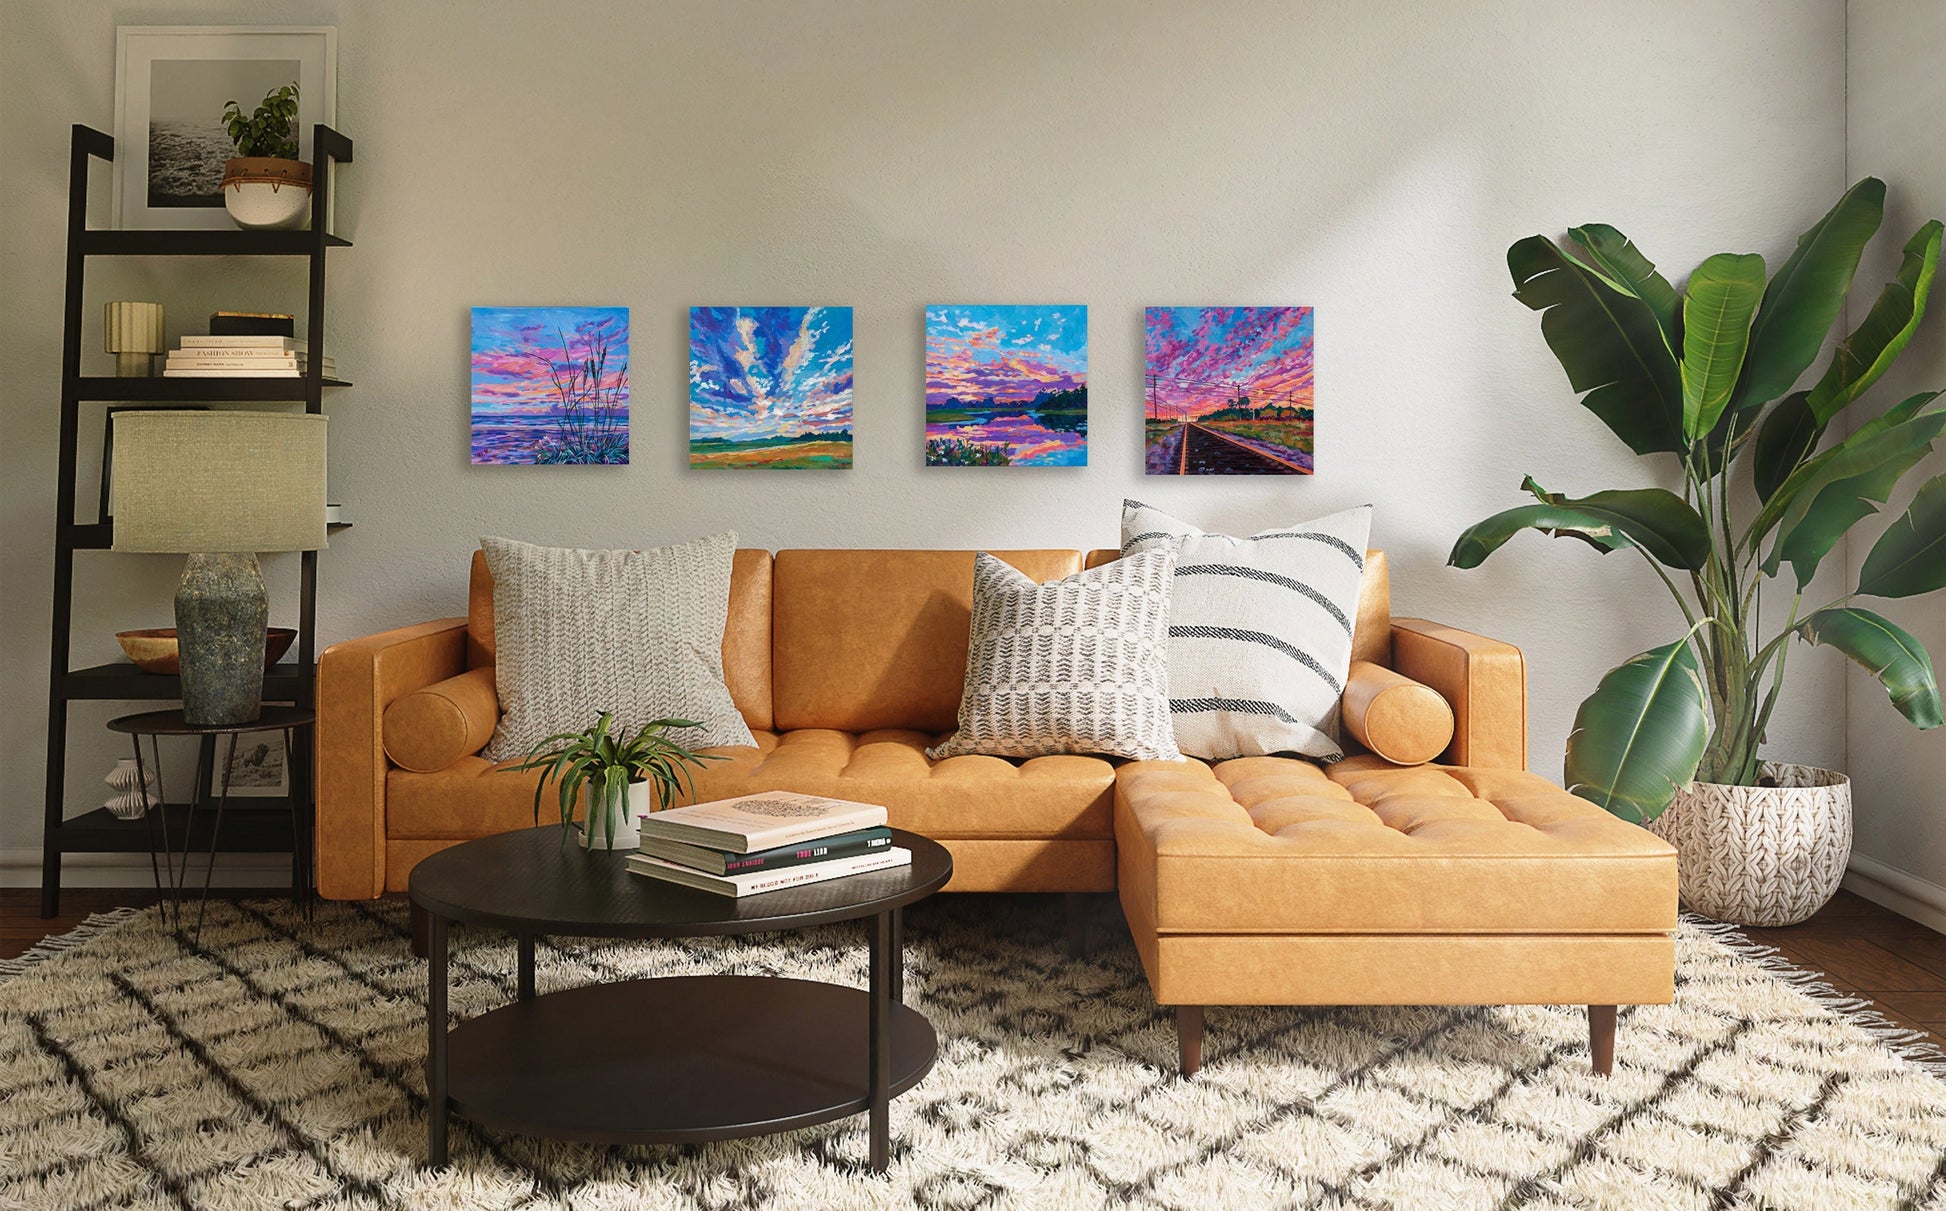 4 16x16 landscape paintings of vibrant skies at sunrise and sunset in a modern living room setting